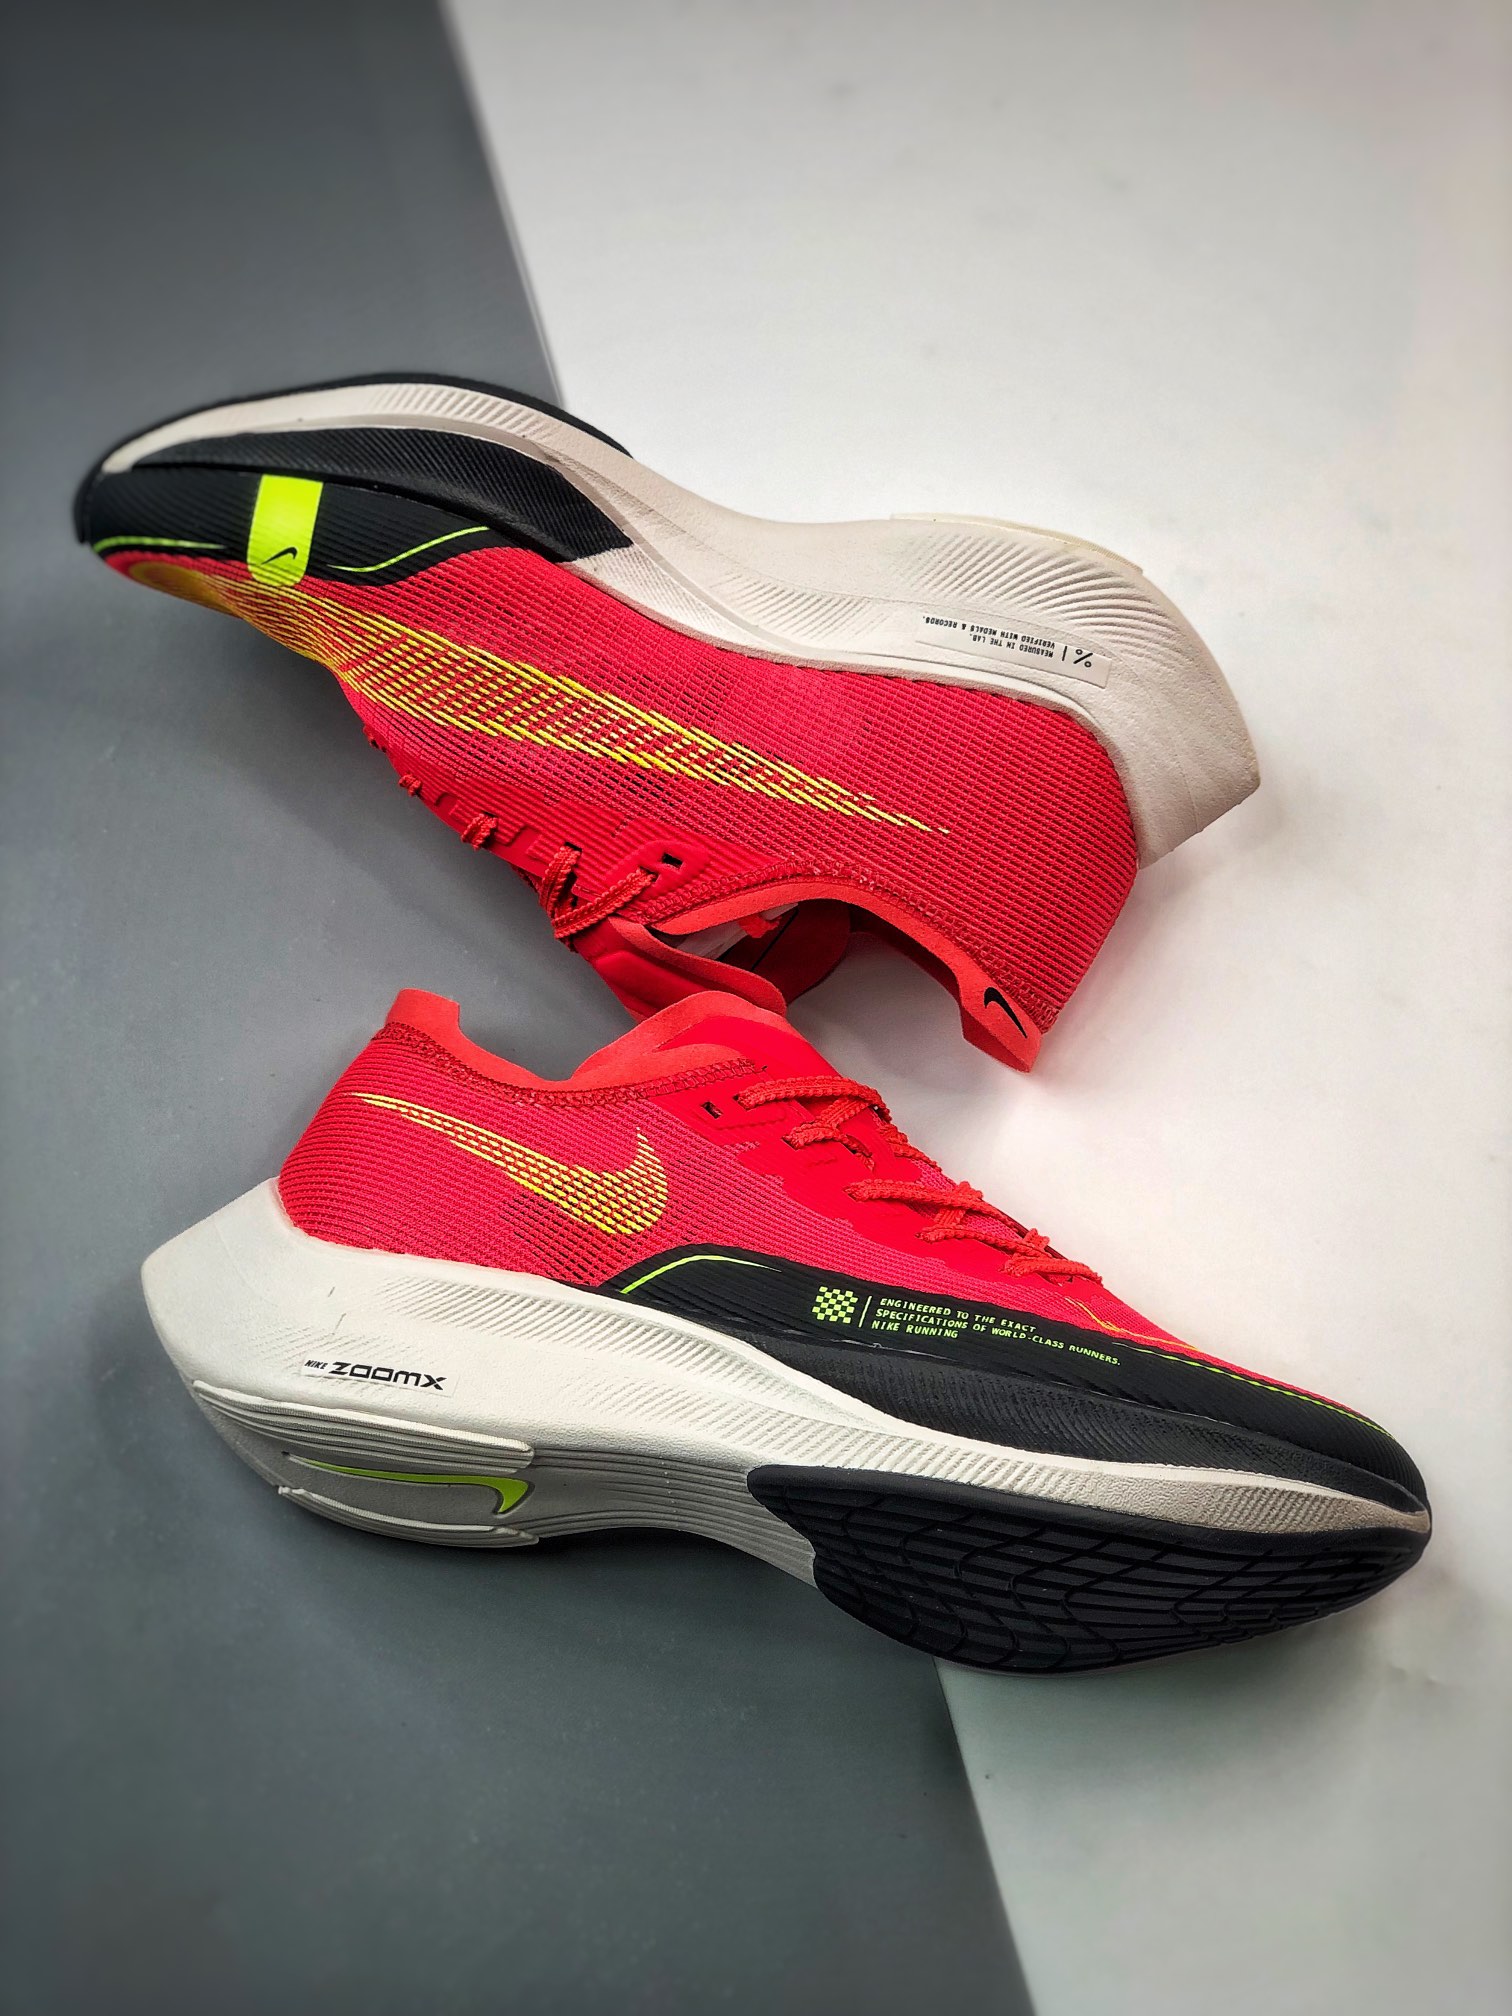 Nike-ZoomX-VaporFly-NEXT-2-Siren-Red-And-Volt-CU4111-600-For-Sale-3.jpg